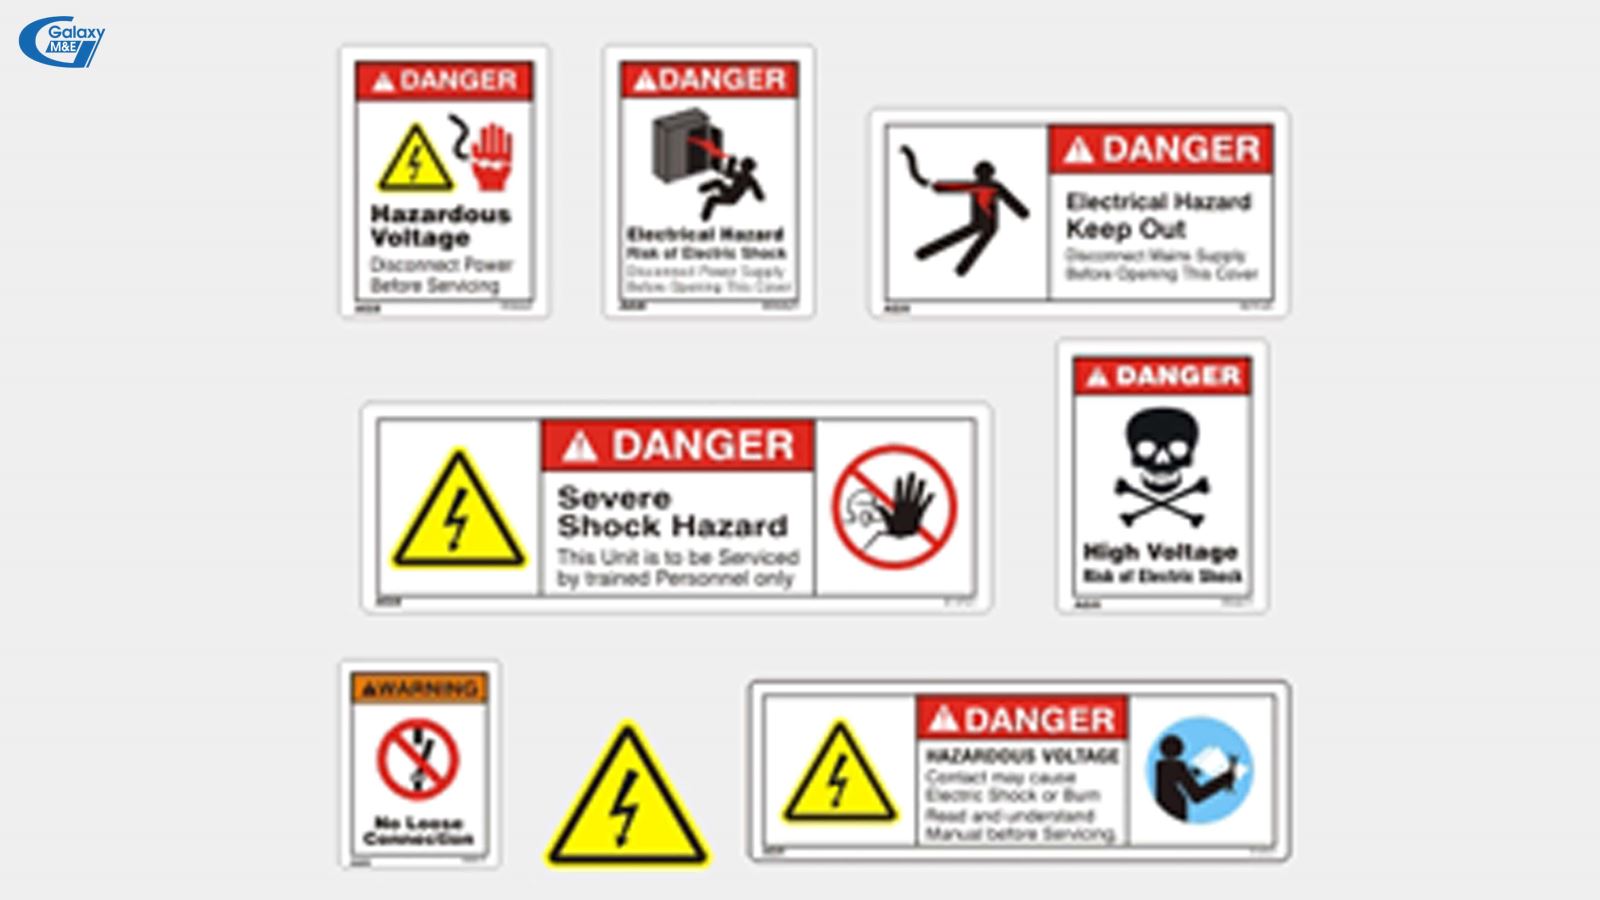 Signs warning electric accidents according to international standards | Galaxy M&E